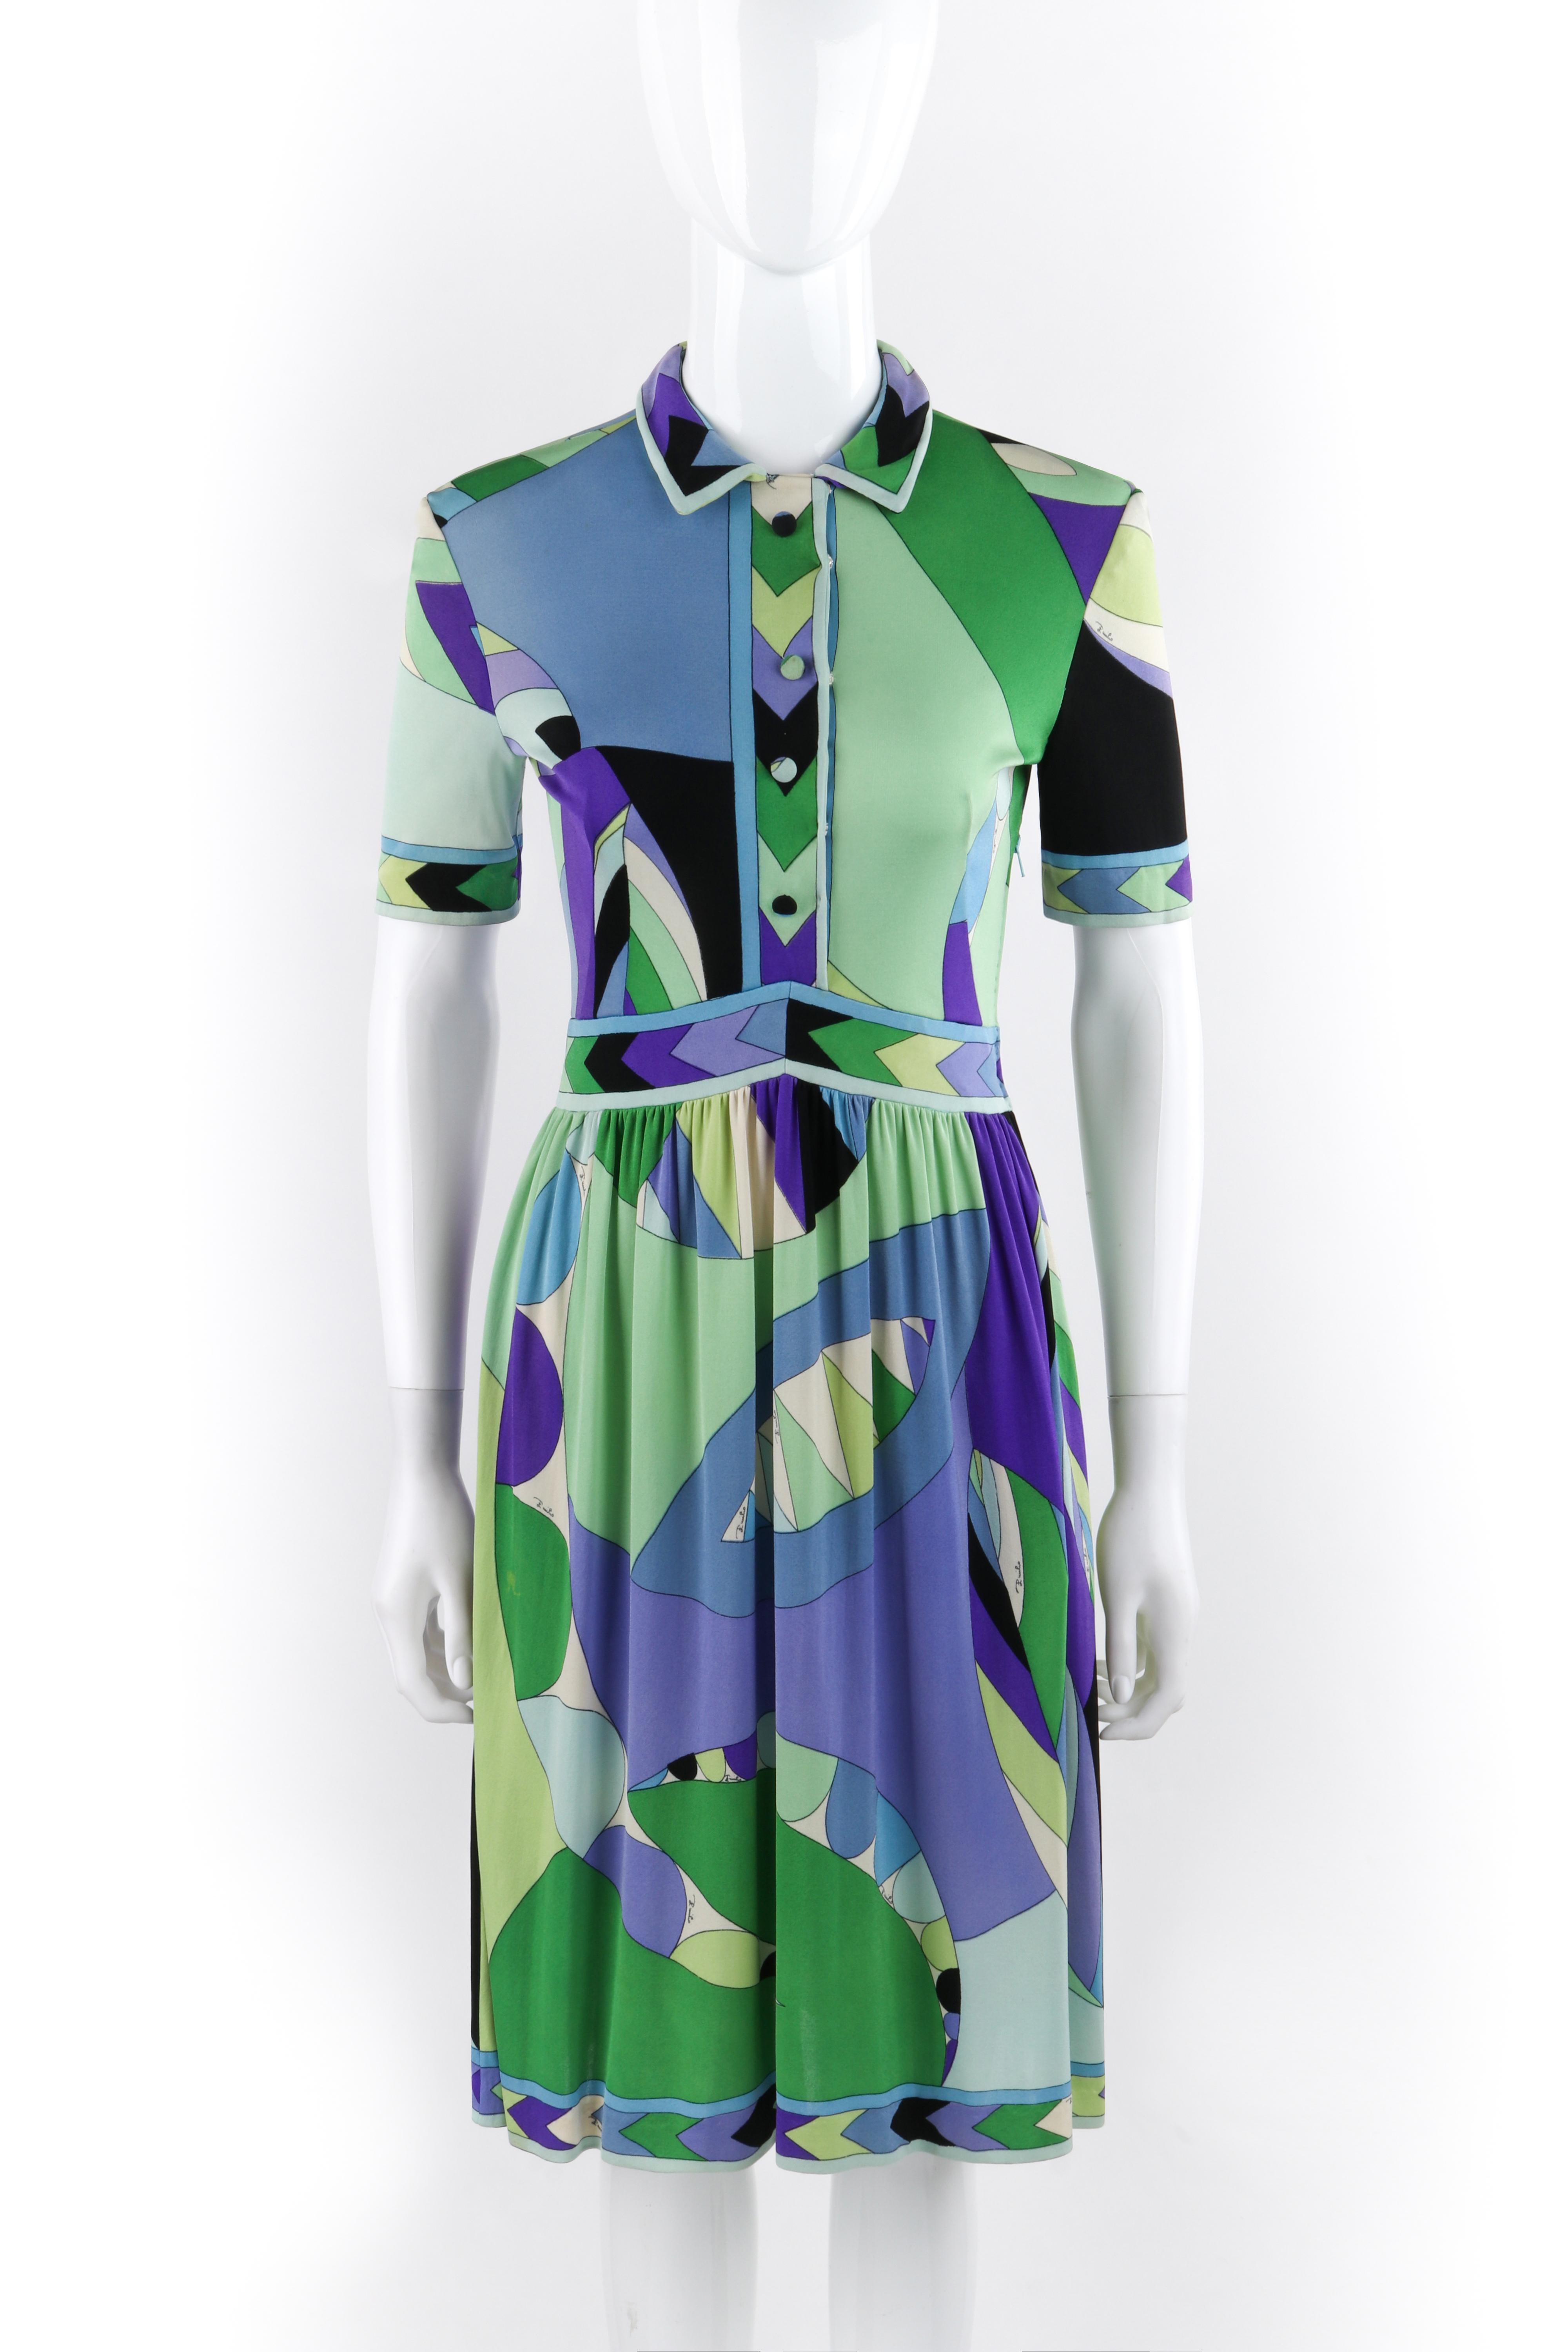 EMILIO PUCCI c.1960’s Button Front Signature Geometric SS Silk Day Dress
Circa: 1960’s
Label(s): Emilio Pucci; Made in Italy for Lord & Taylor
Designer: Emilio Pucci
Style: Day dress
Color(s): Shades of green, blue, purple, white, and black
Lined: